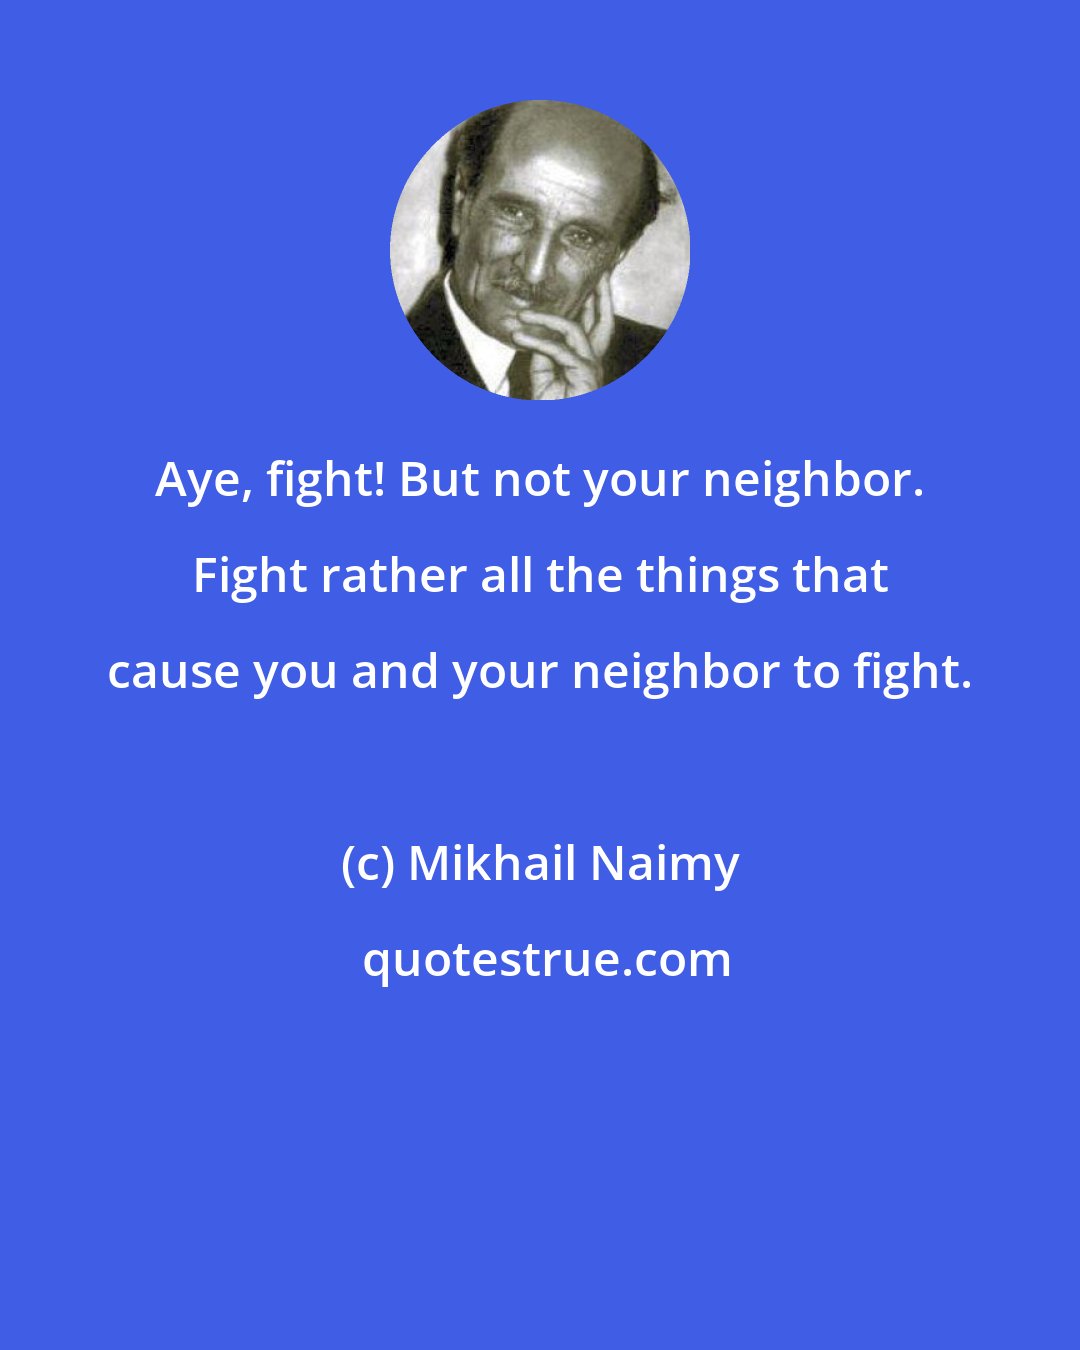 Mikhail Naimy: Aye, fight! But not your neighbor. Fight rather all the things that cause you and your neighbor to fight.